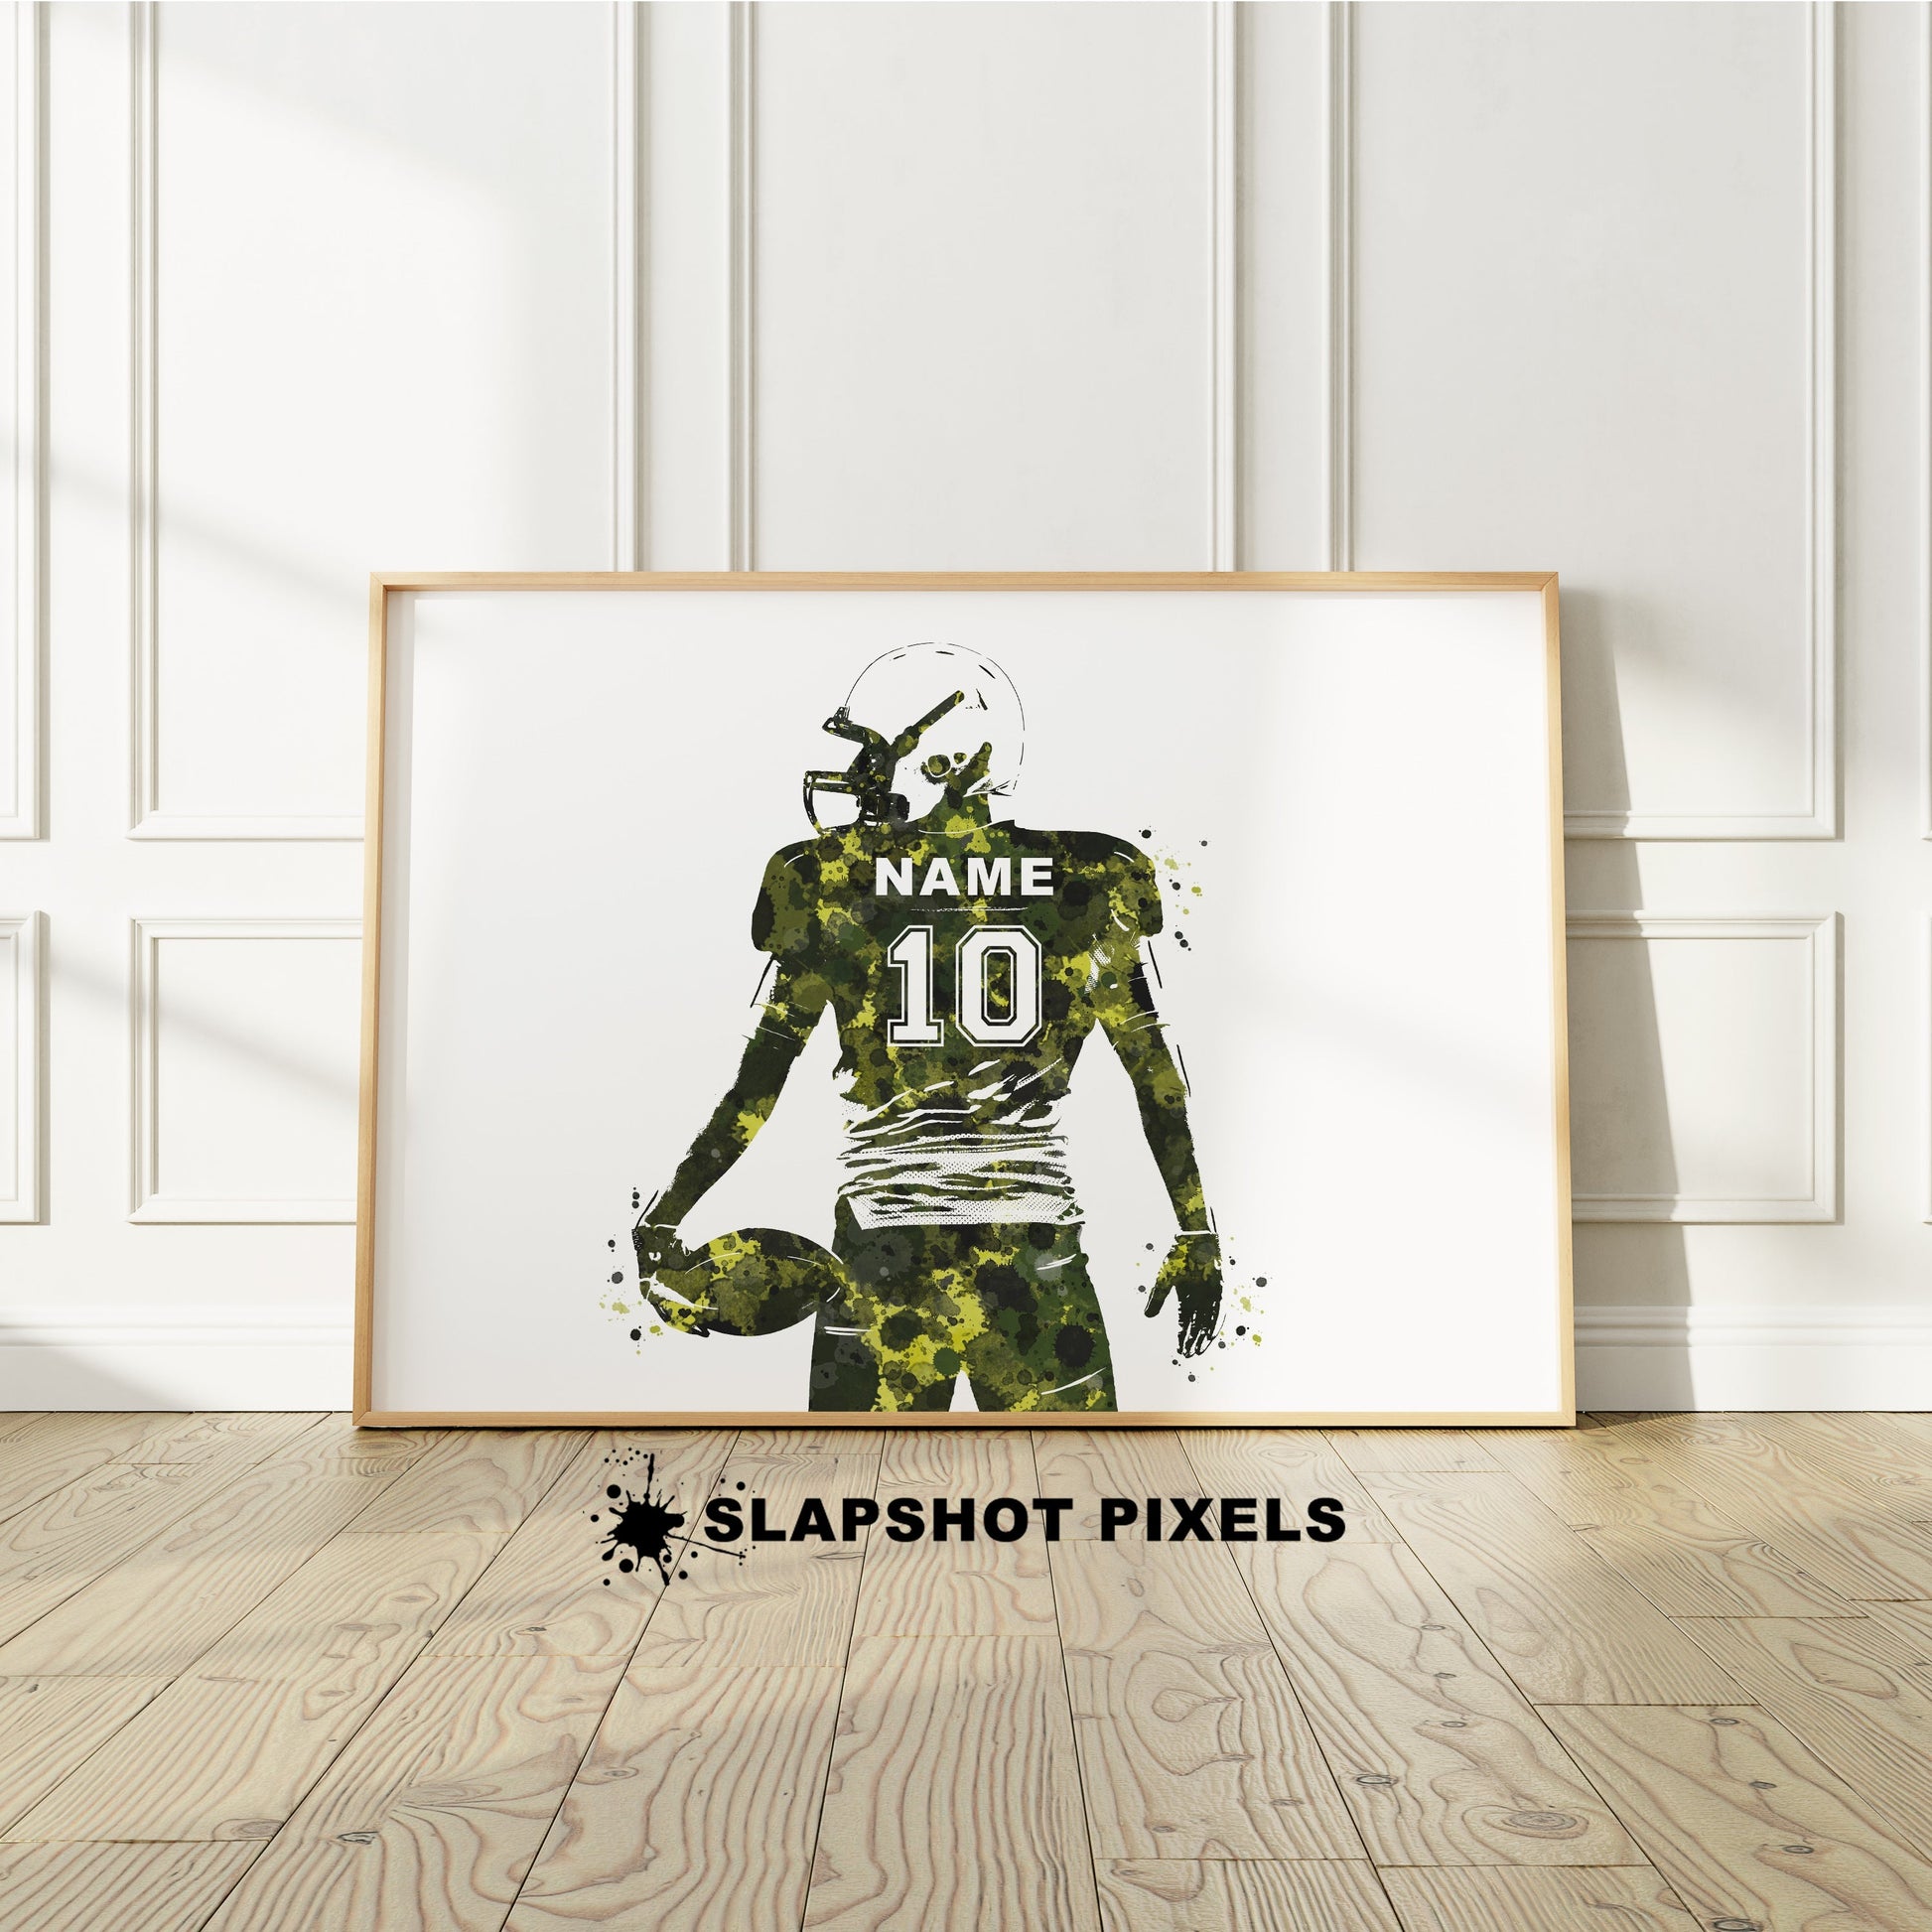 Personalized boy football poster showing back of a football player from the waist up holding a football with custom name and number on the football jersey. Designed in watercolor splatters. Perfect football gifts for boys, football goalie prints, football team gifts, football coach gift, football wall art décor in a football bedroom and birthday gifts for football players.